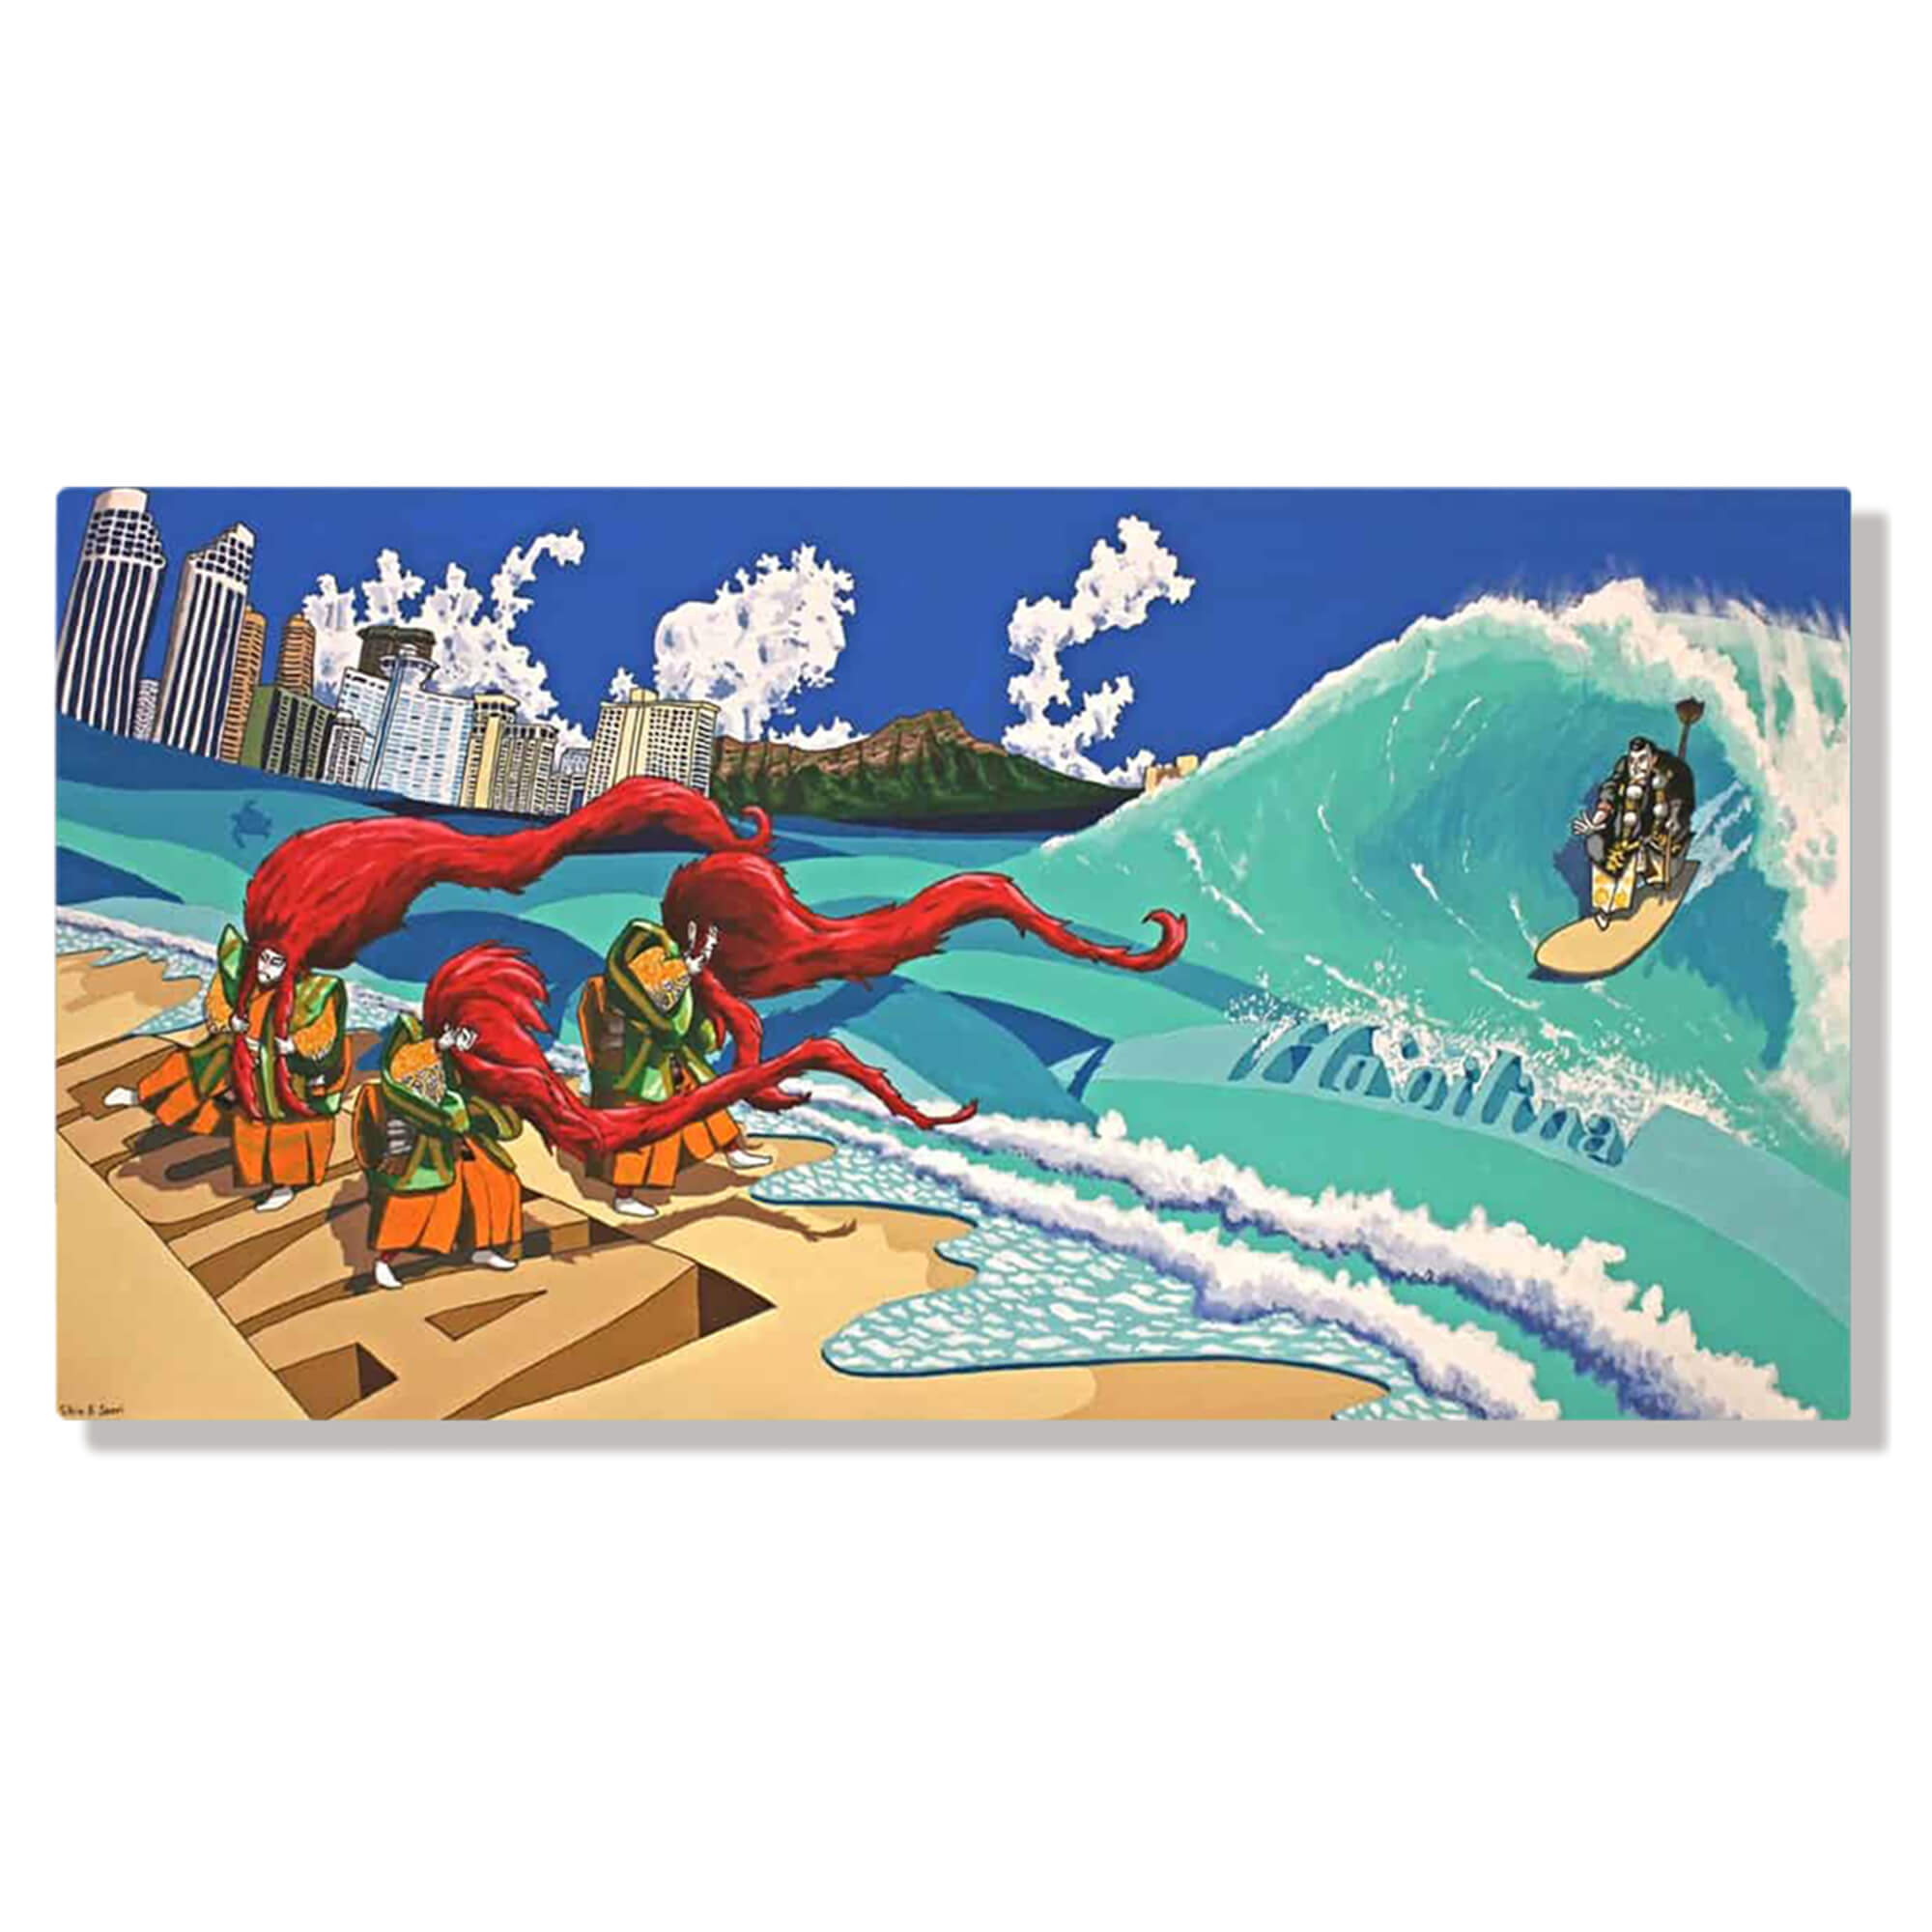 A metal art print of an imagined scene taking place between the characters on the beach in Waikiki by Hawaii artist Shin Kato